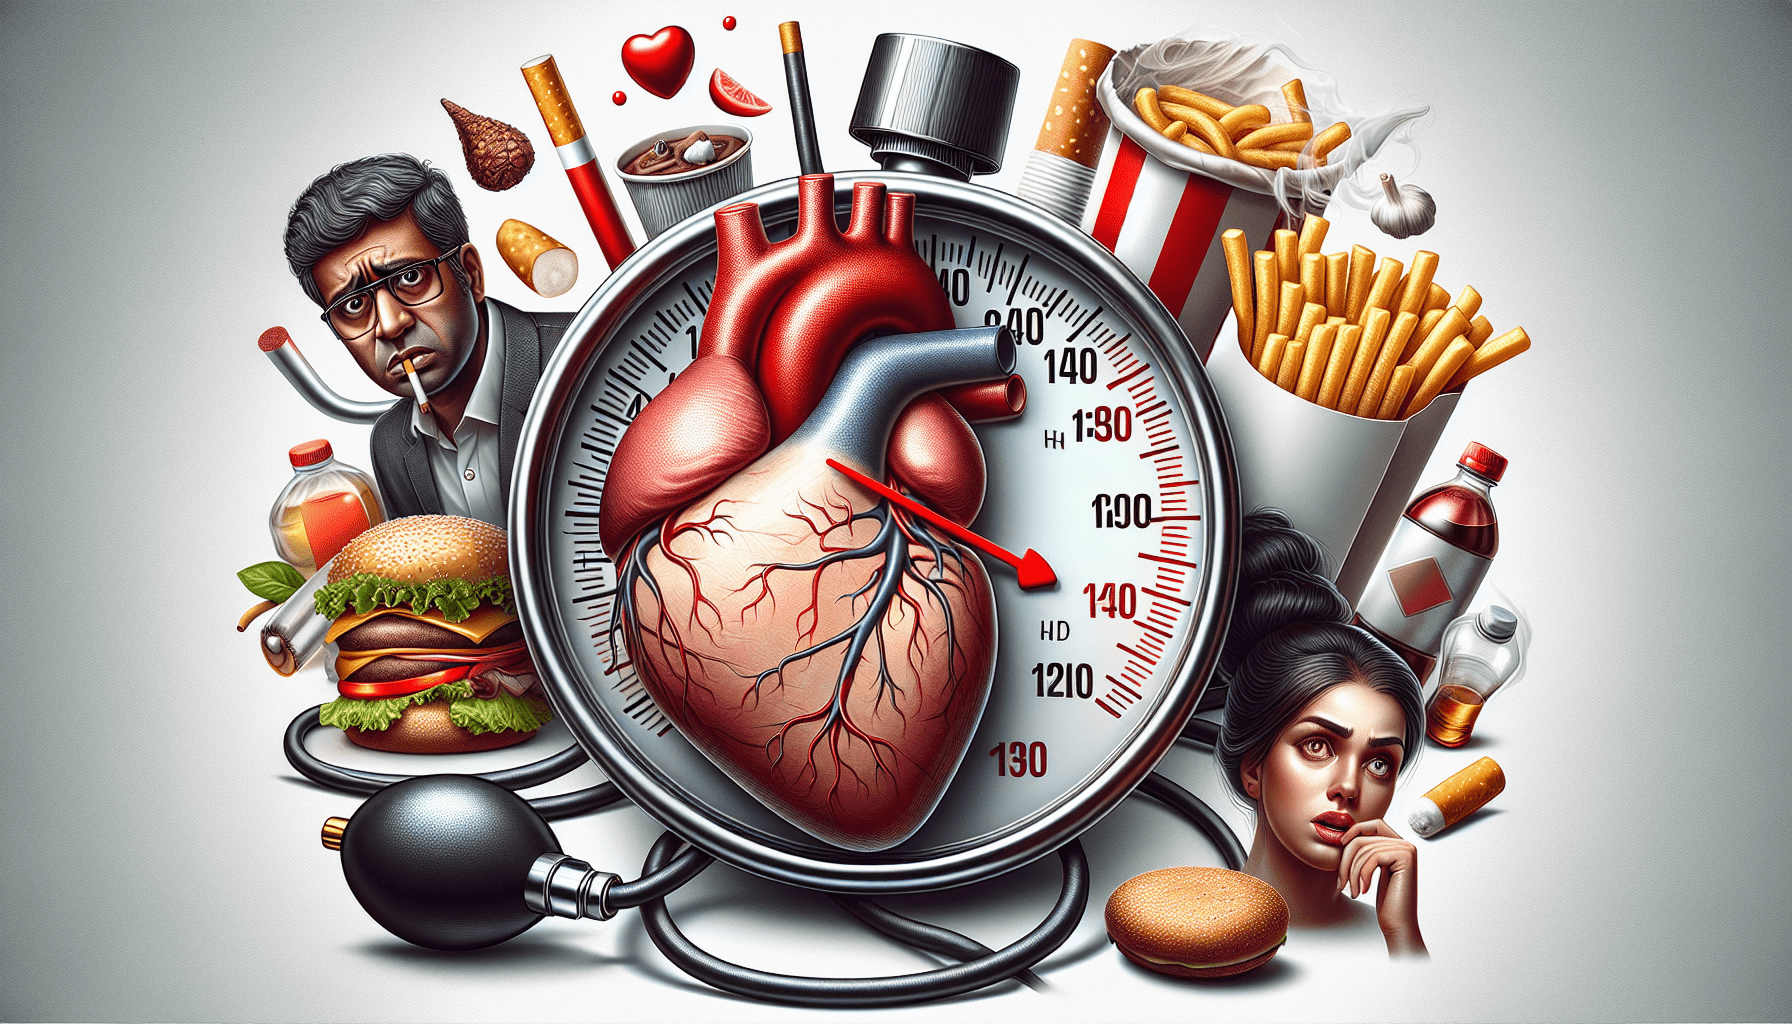 Causes of hypertension